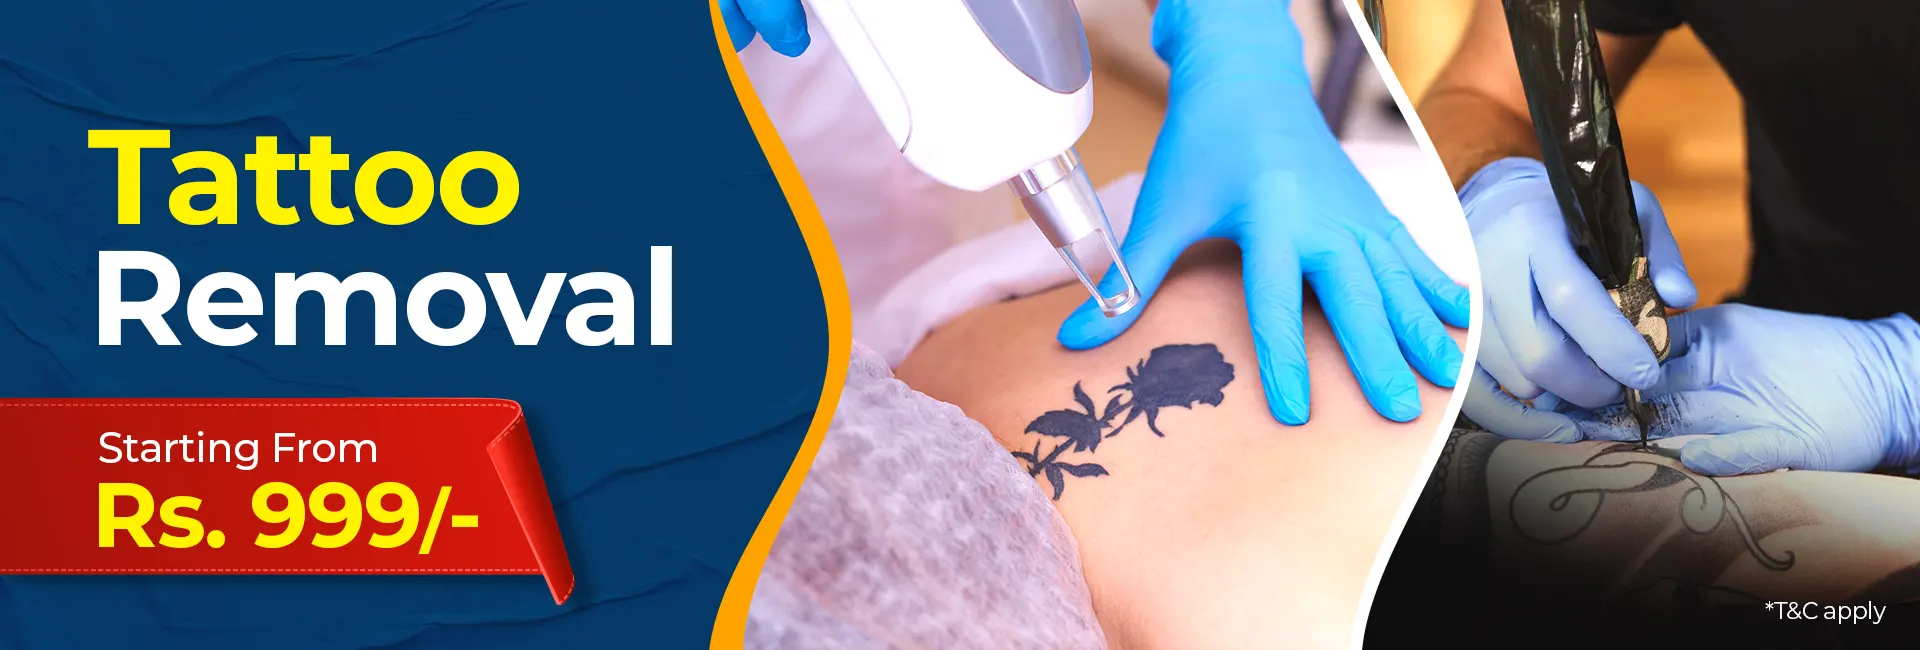 Tattoo And piercing at your home 199 Rs inch - Other Services - 1759611478